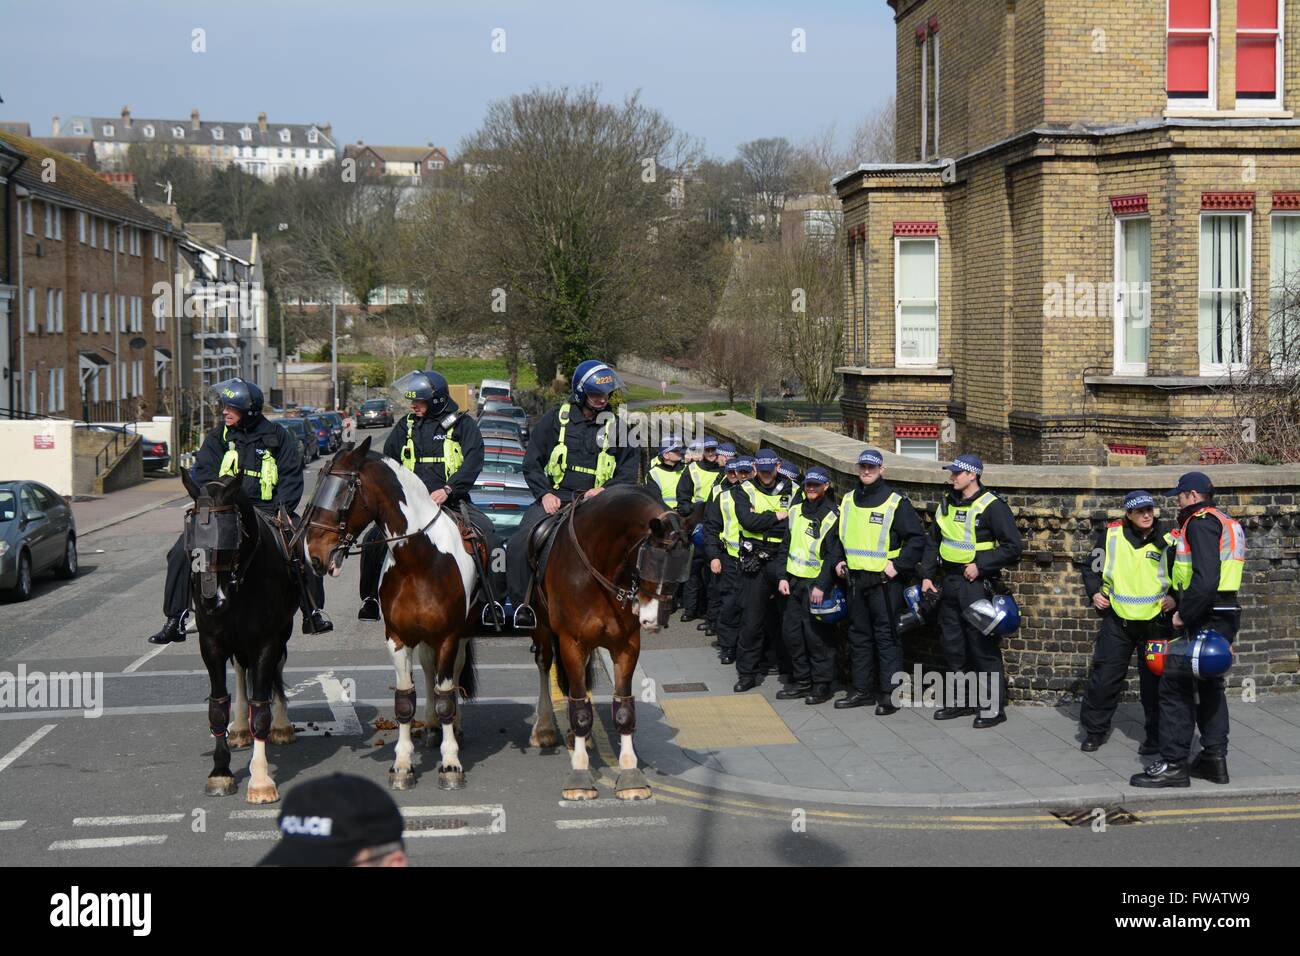 Dover, UK. 2nd April 2016. Clashes As Pro and Anti-refugee groups clash in Dover.  Mounted units and public order officers await the march. Credit: Marc Ward/Alamy Live News Stock Photo